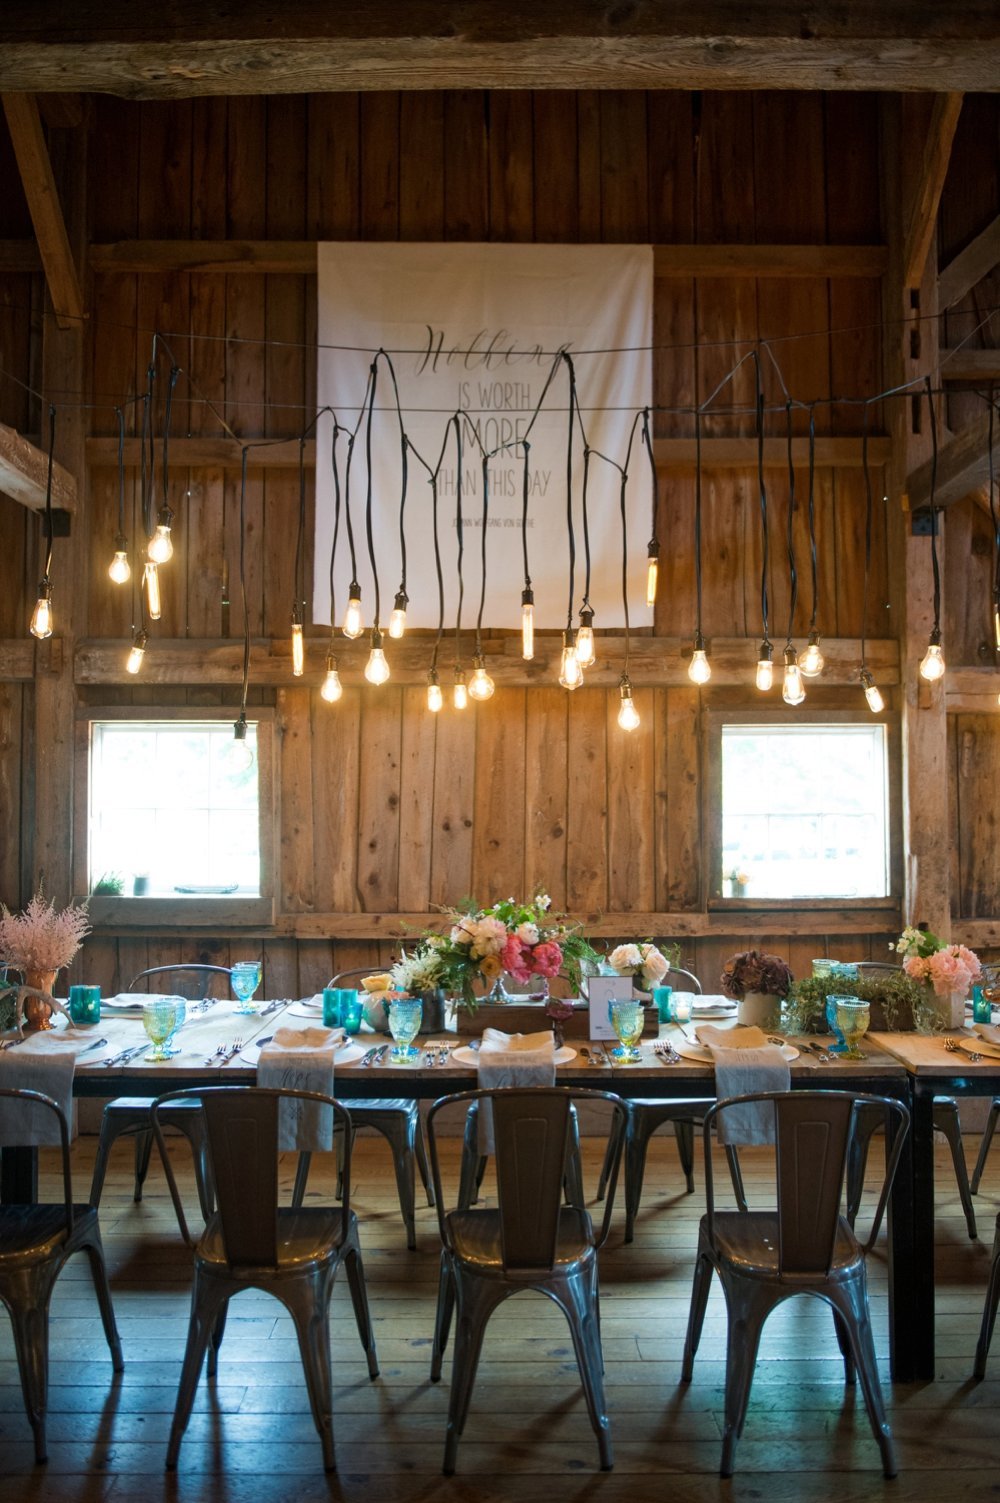 Gorgeous rustic tablescape for barn wedding with Edison Bulb light installation